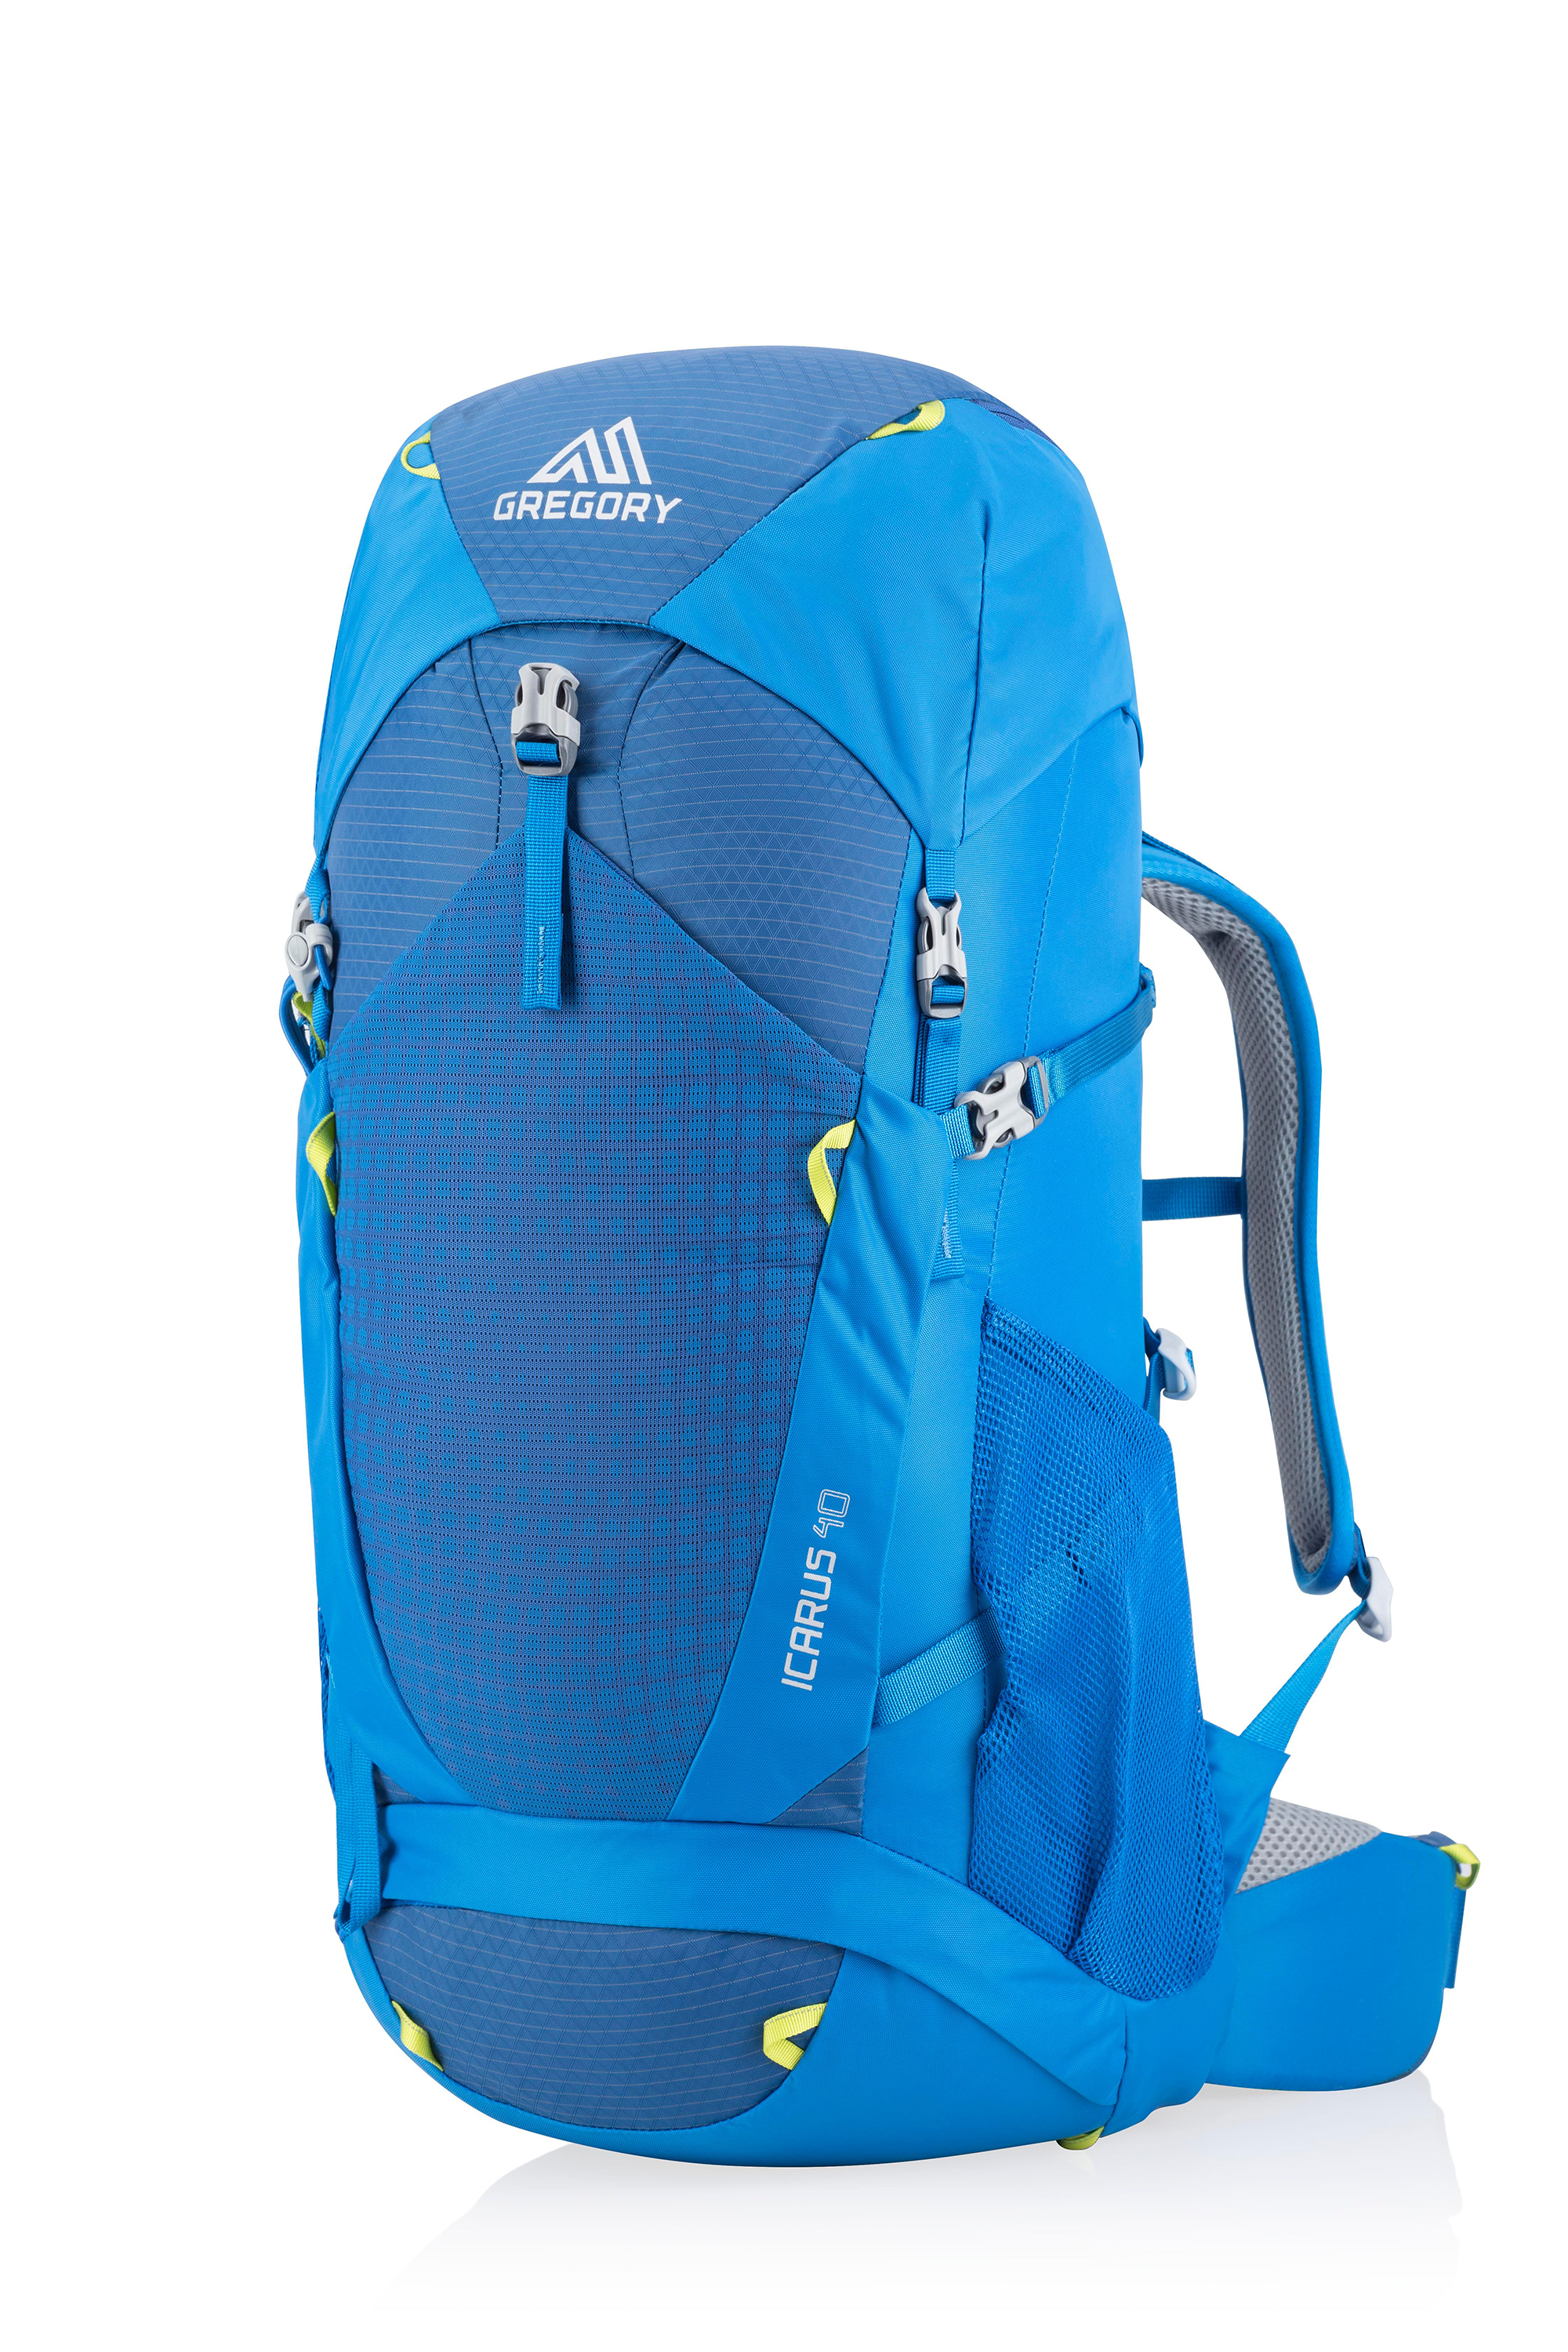 Gregory Icarus 30 Backpack for Kids